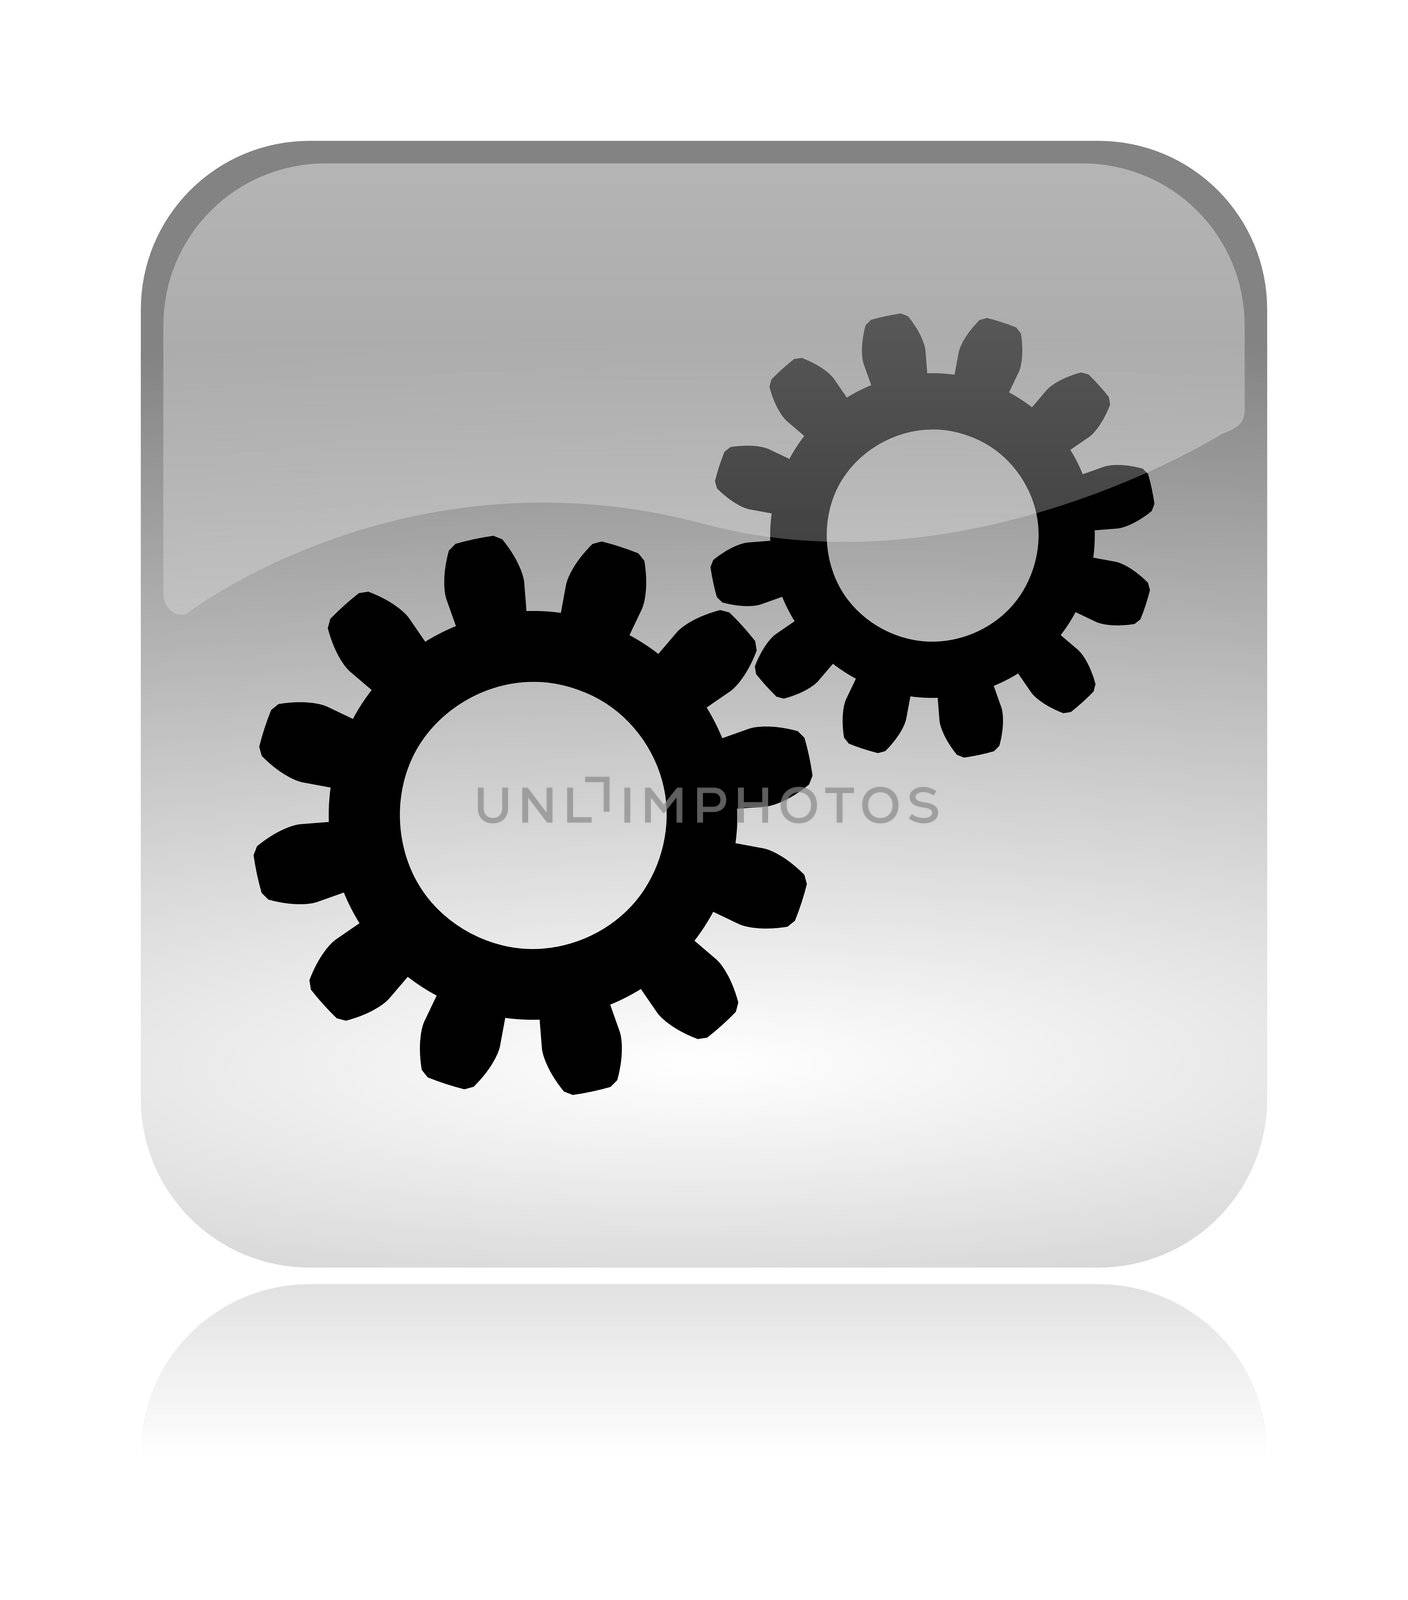 Gears white, transparent and glossy web interface icon with reflection